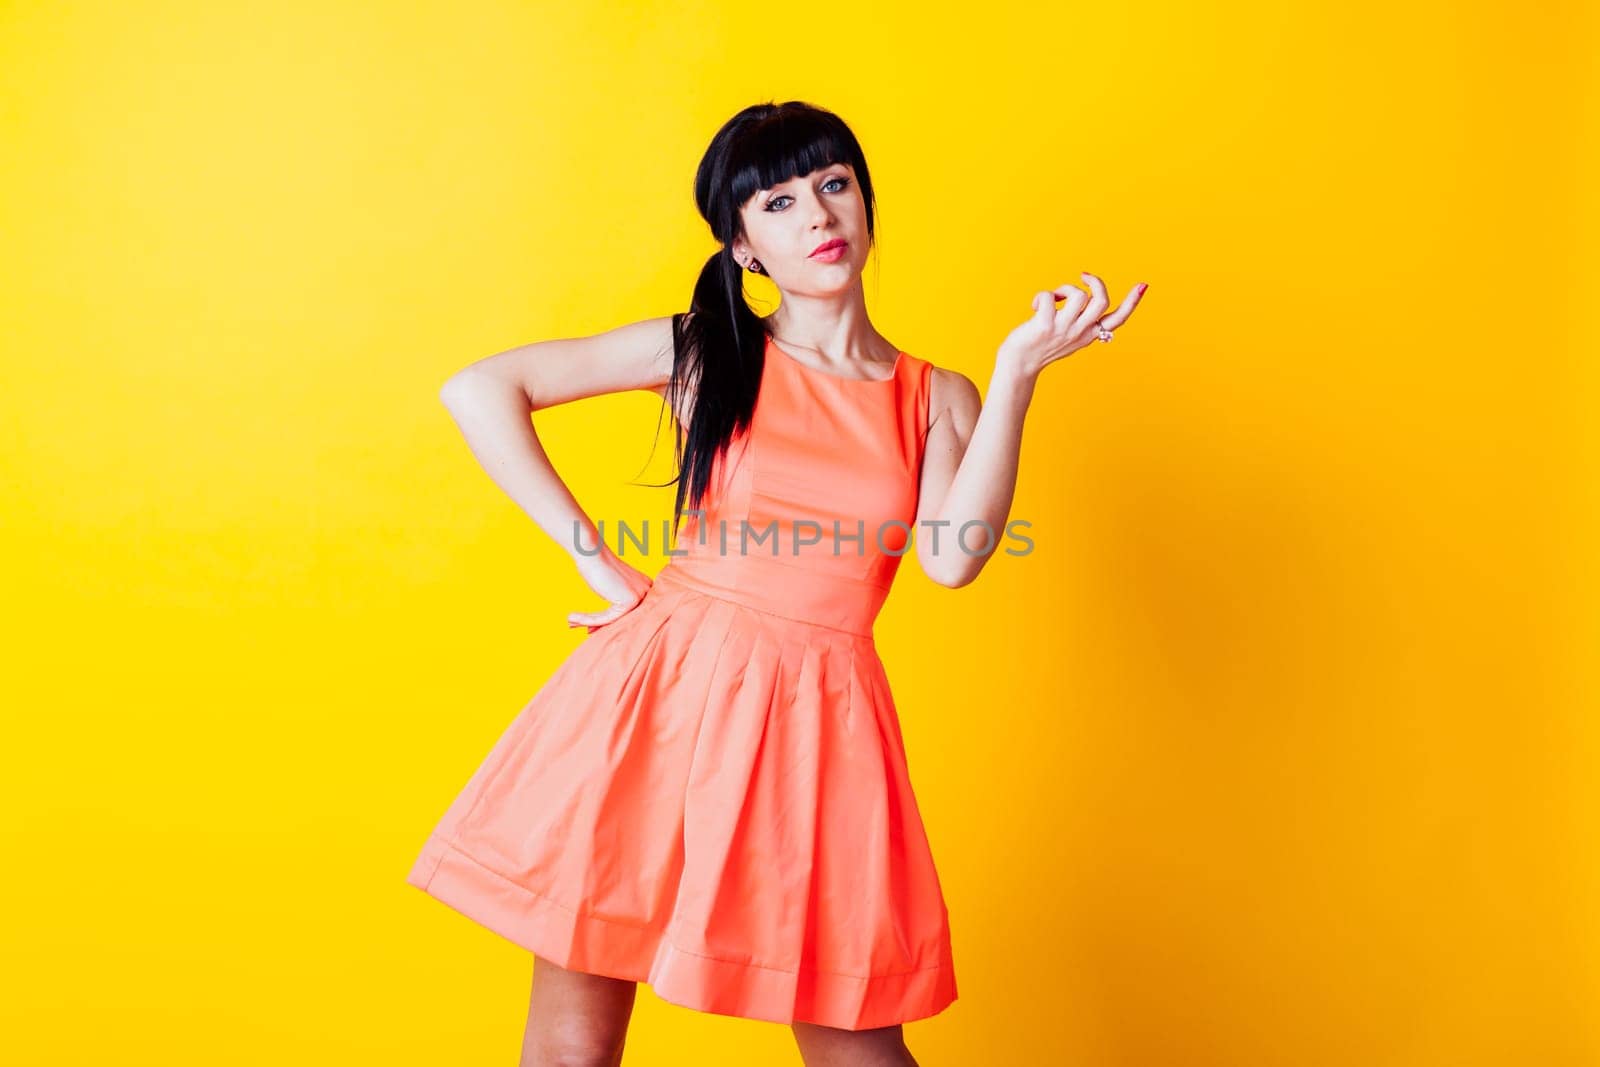 girl in orange dress on a yellow background hands up by Simakov